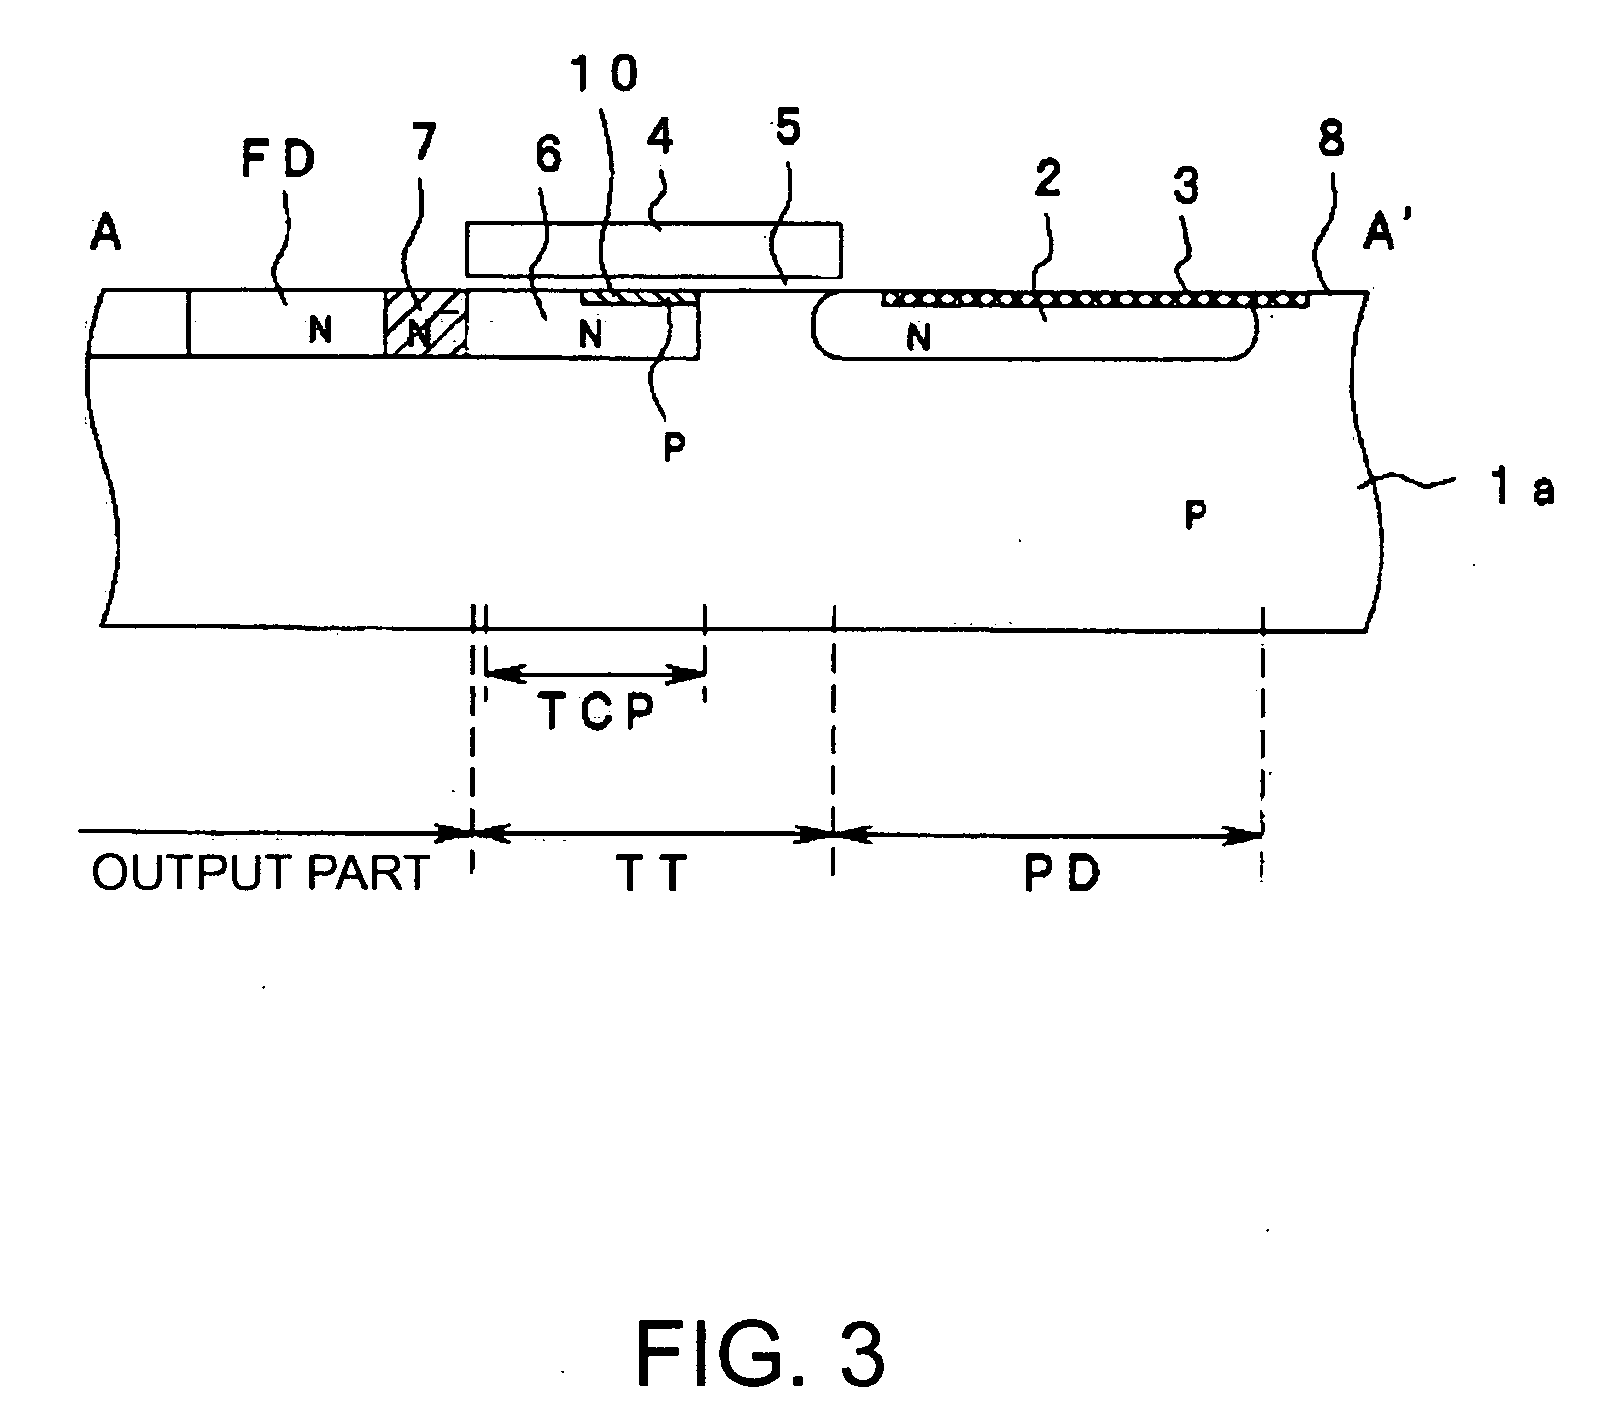 Solid state imaging device